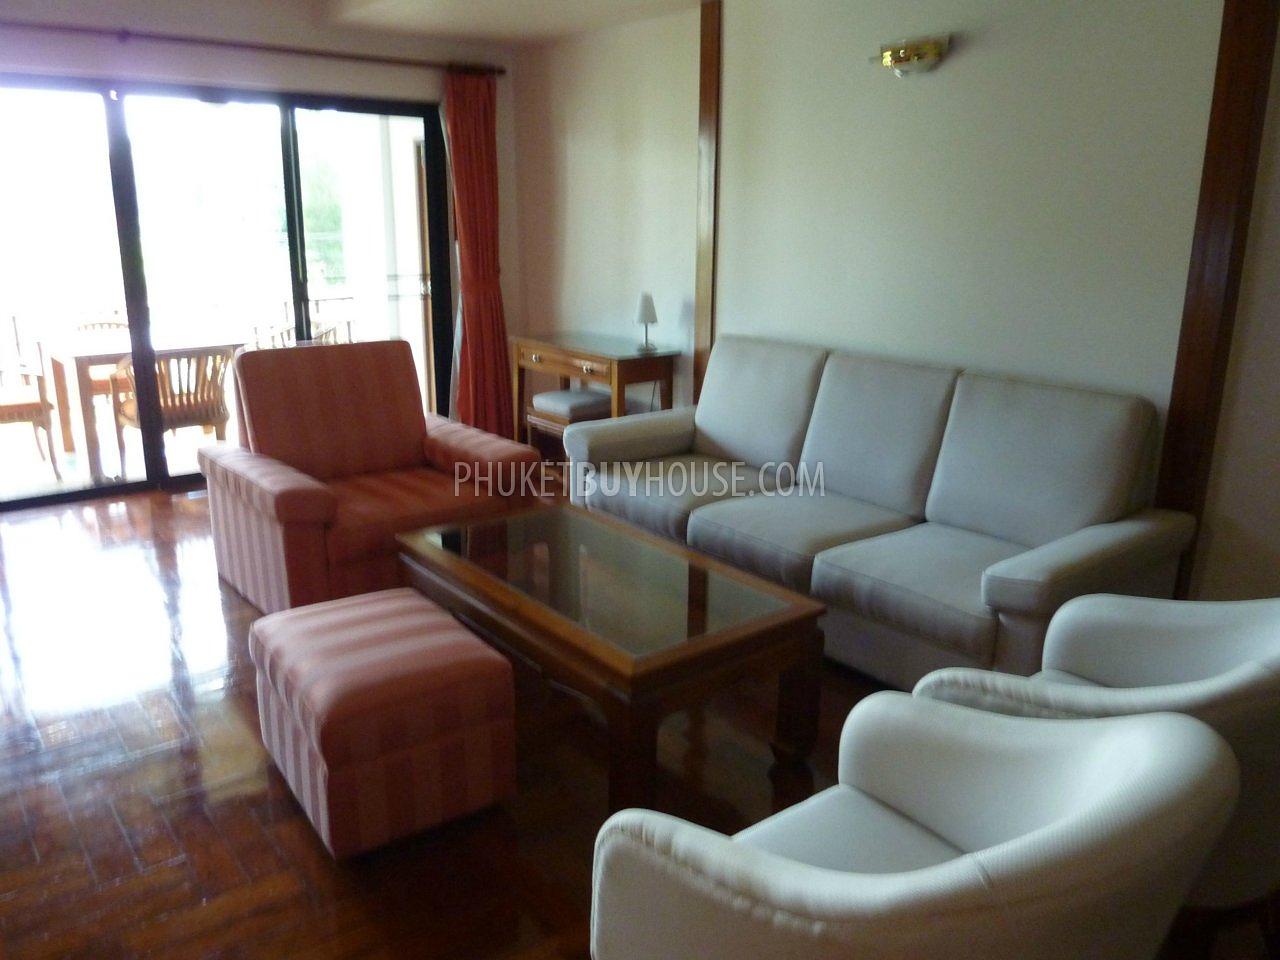 NAI2456: Freehold: Very nice 2 bedr. apartment (top floor), fully furnished, near beautiful Nai Harn Beach. Photo #9